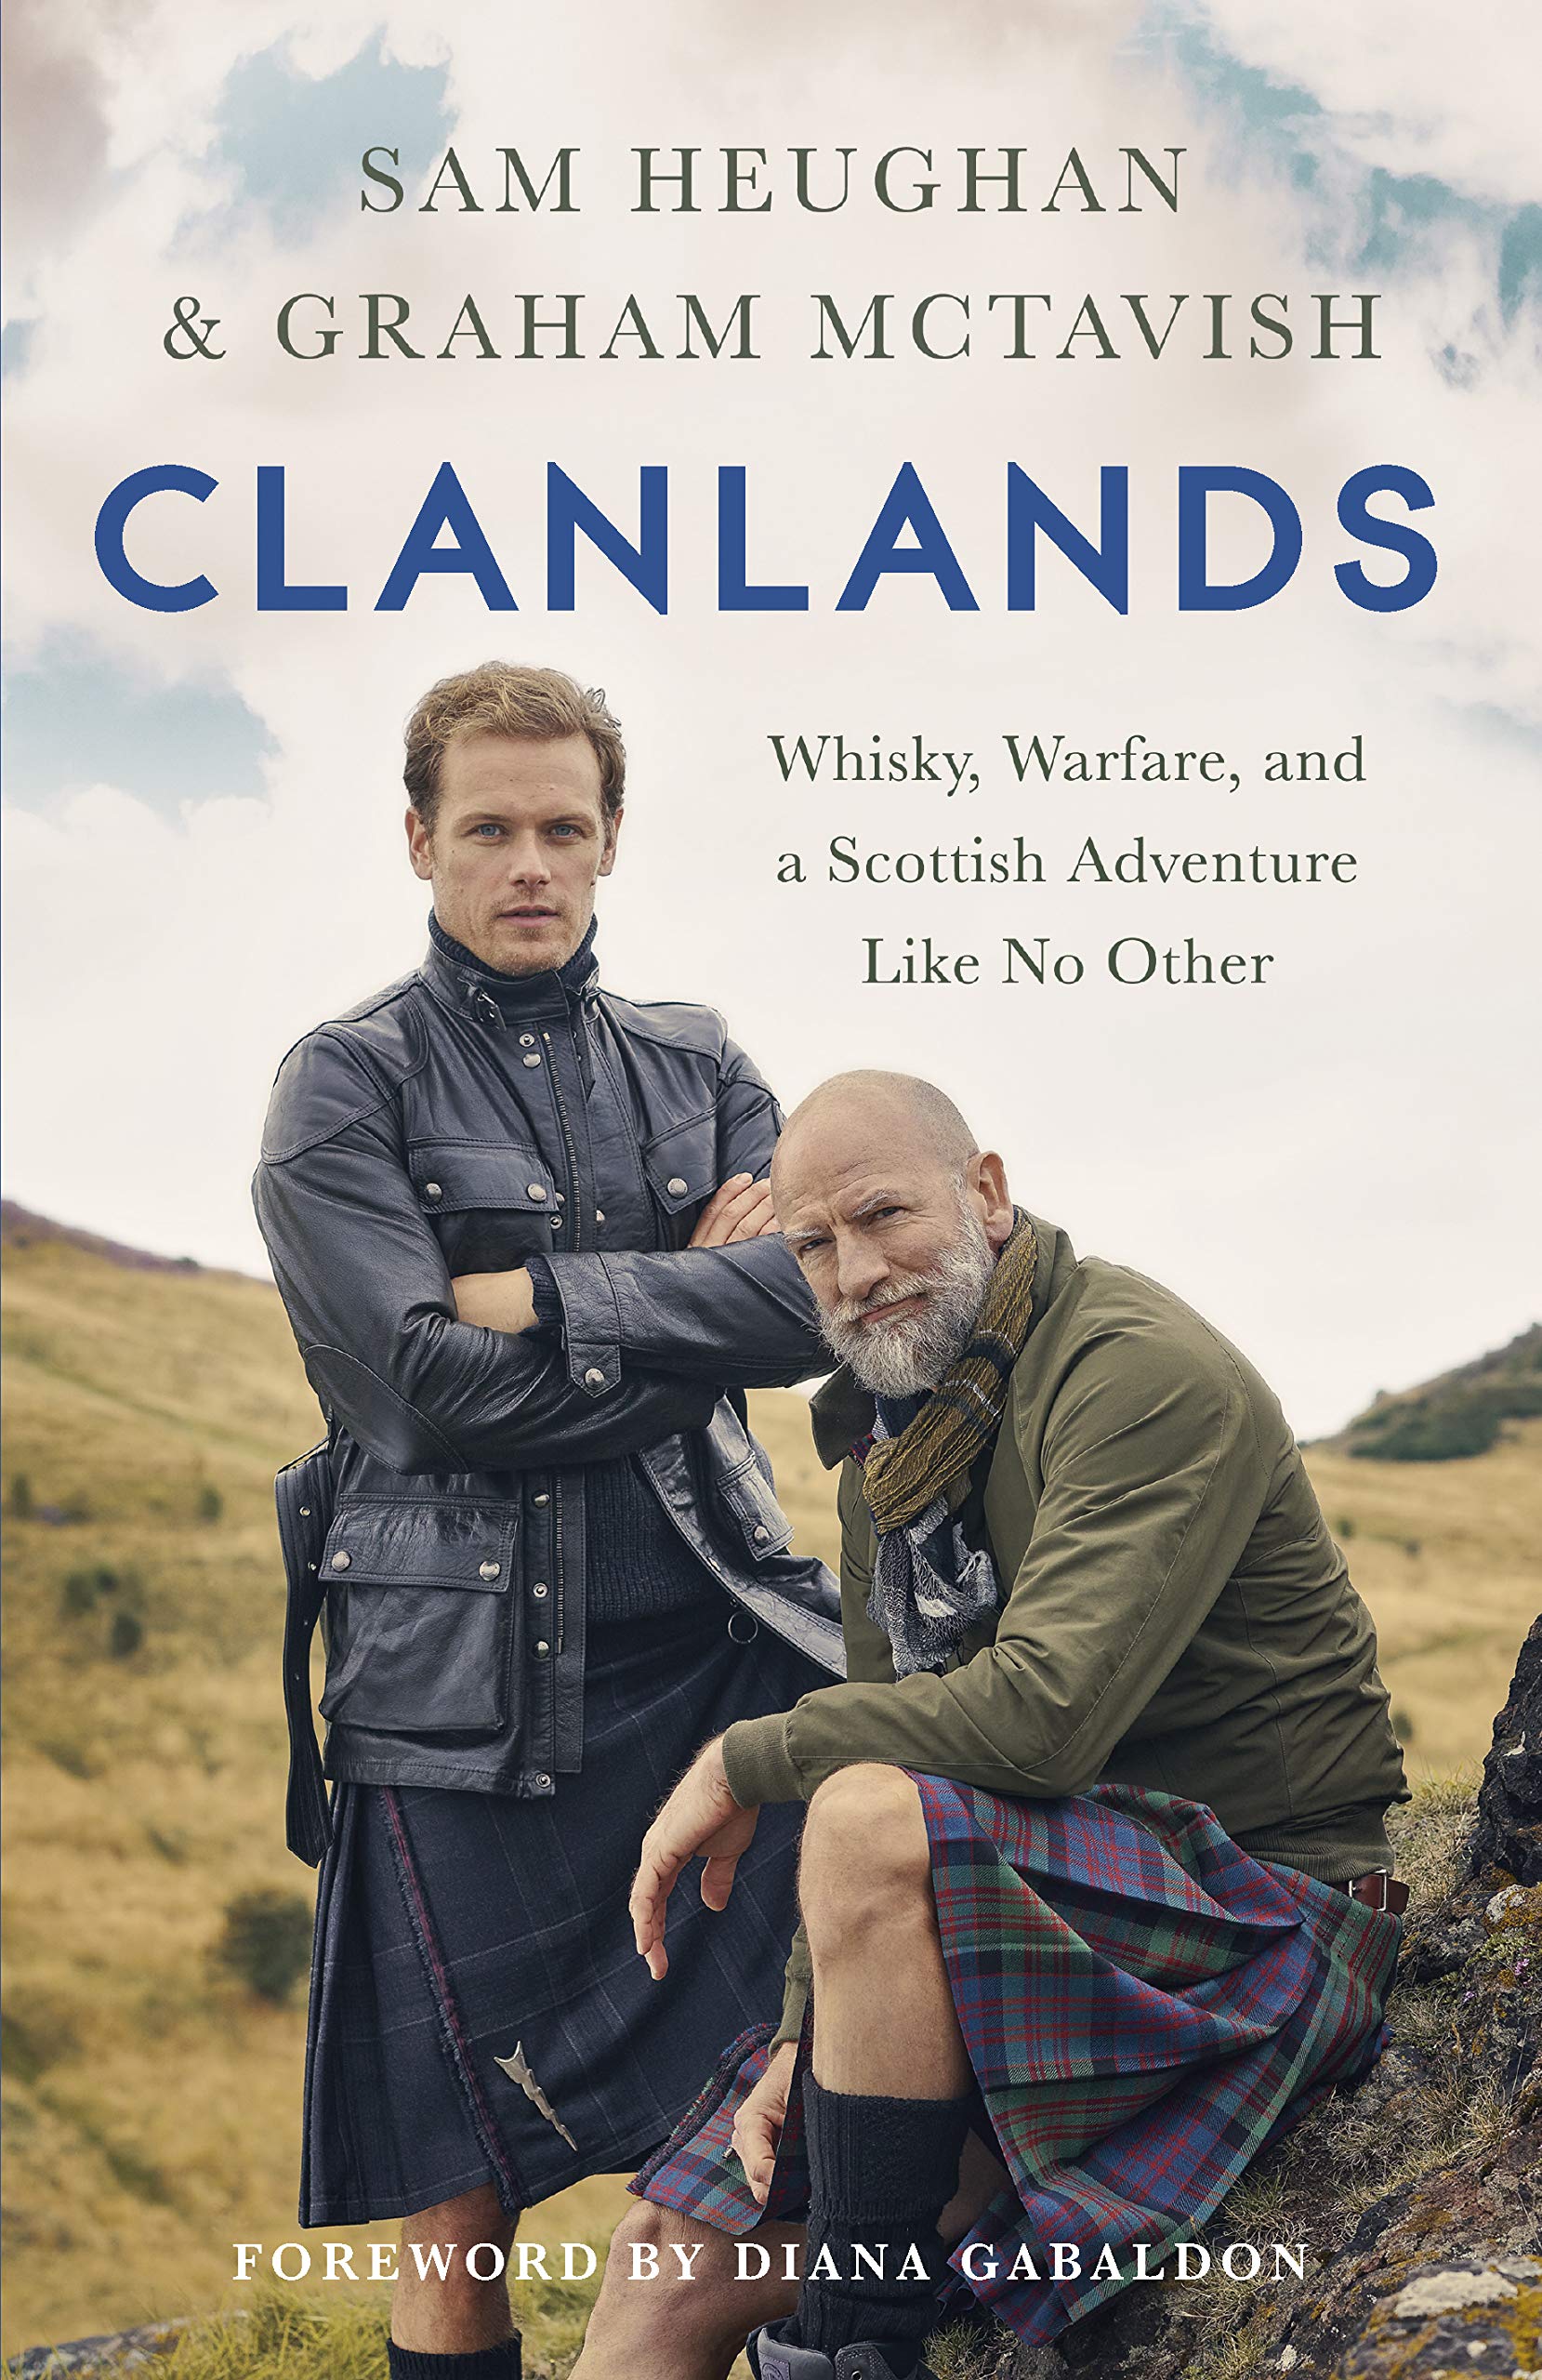 Books　Adventure　–　Like　and　Other　Scottish　Clanlands:　Warfare,　No　Whisky,　a　Pantego